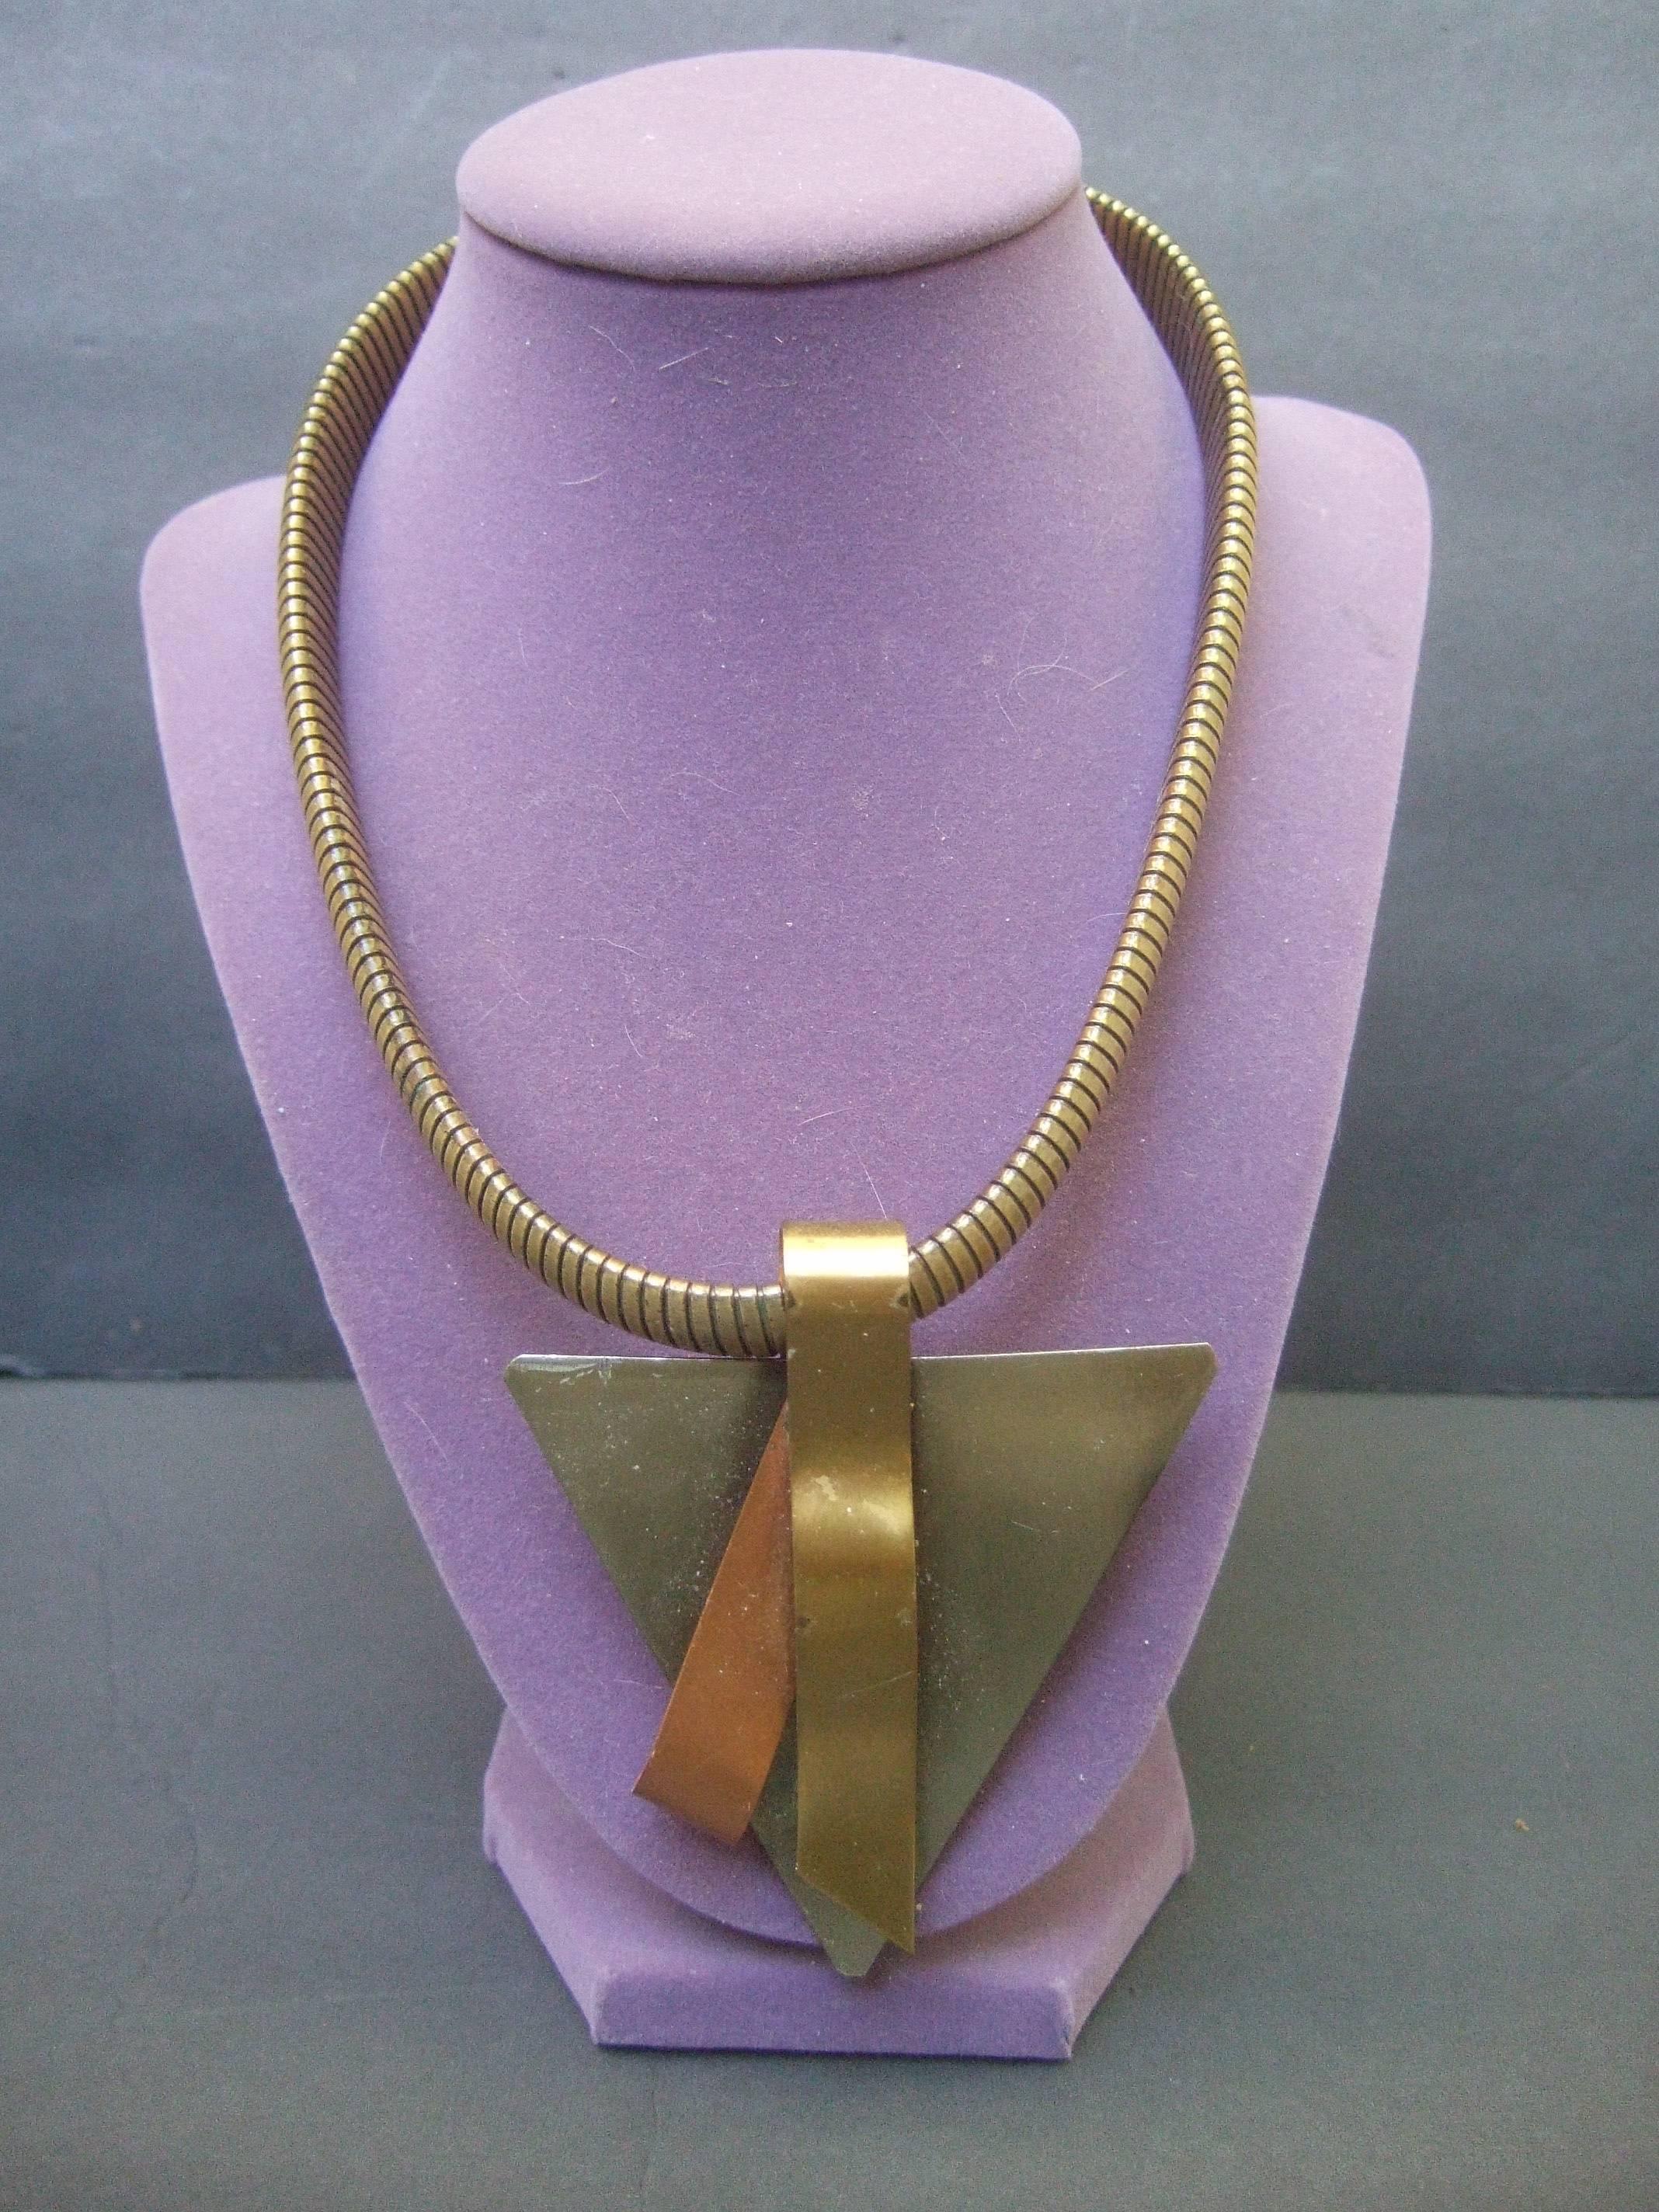 Brutalist Mixed Metal Industrial Choker Necklace c 1990s In Excellent Condition For Sale In University City, MO